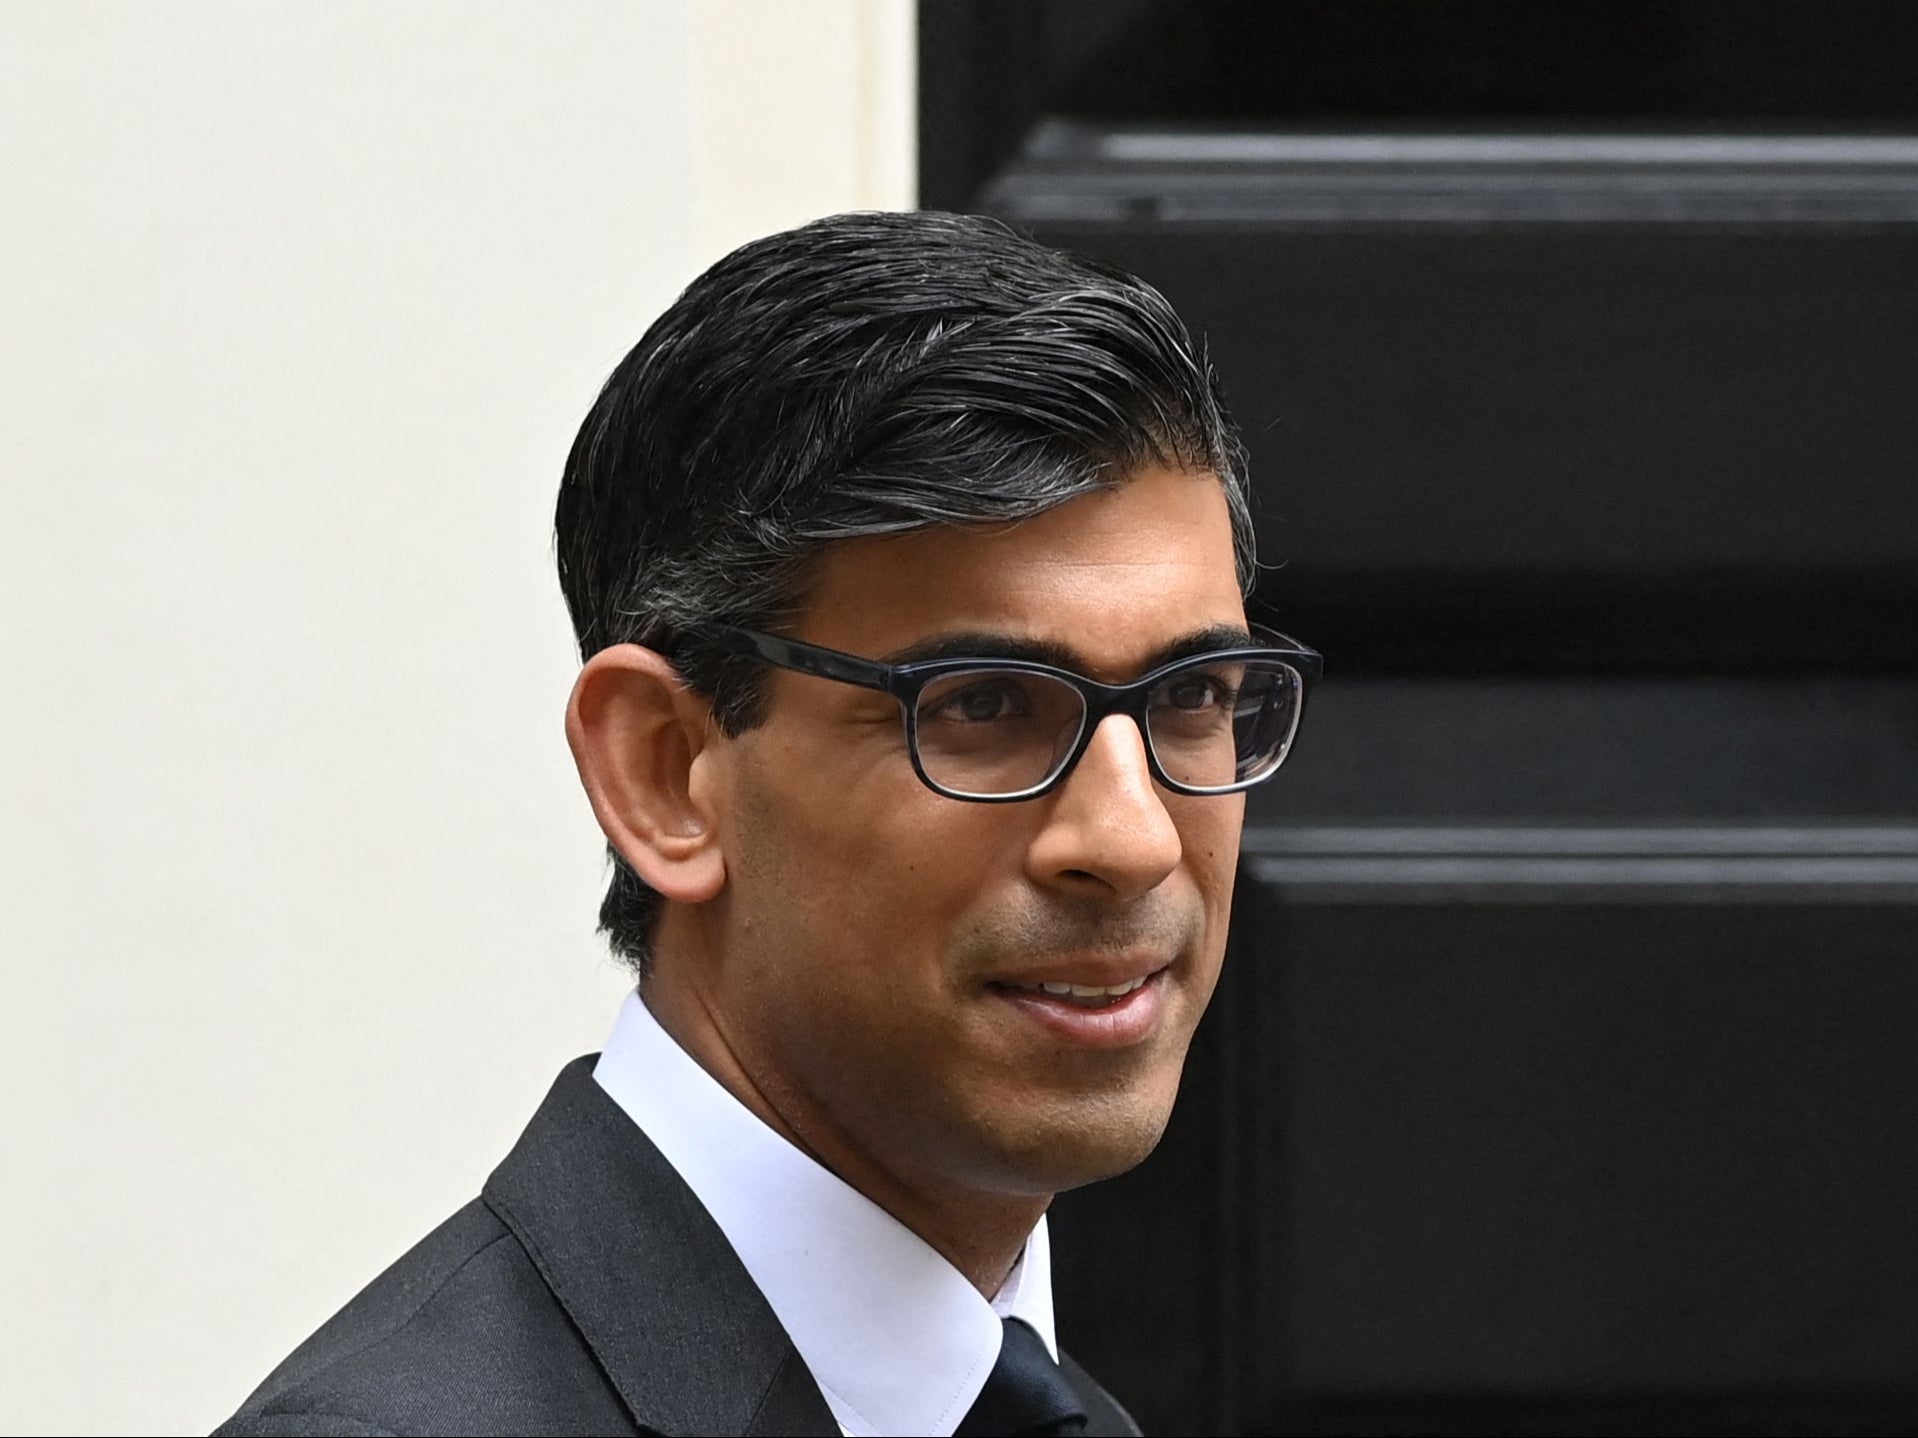 The chancellor, Rishi Sunak, has pledged to end furlough this month and cut benefits in October